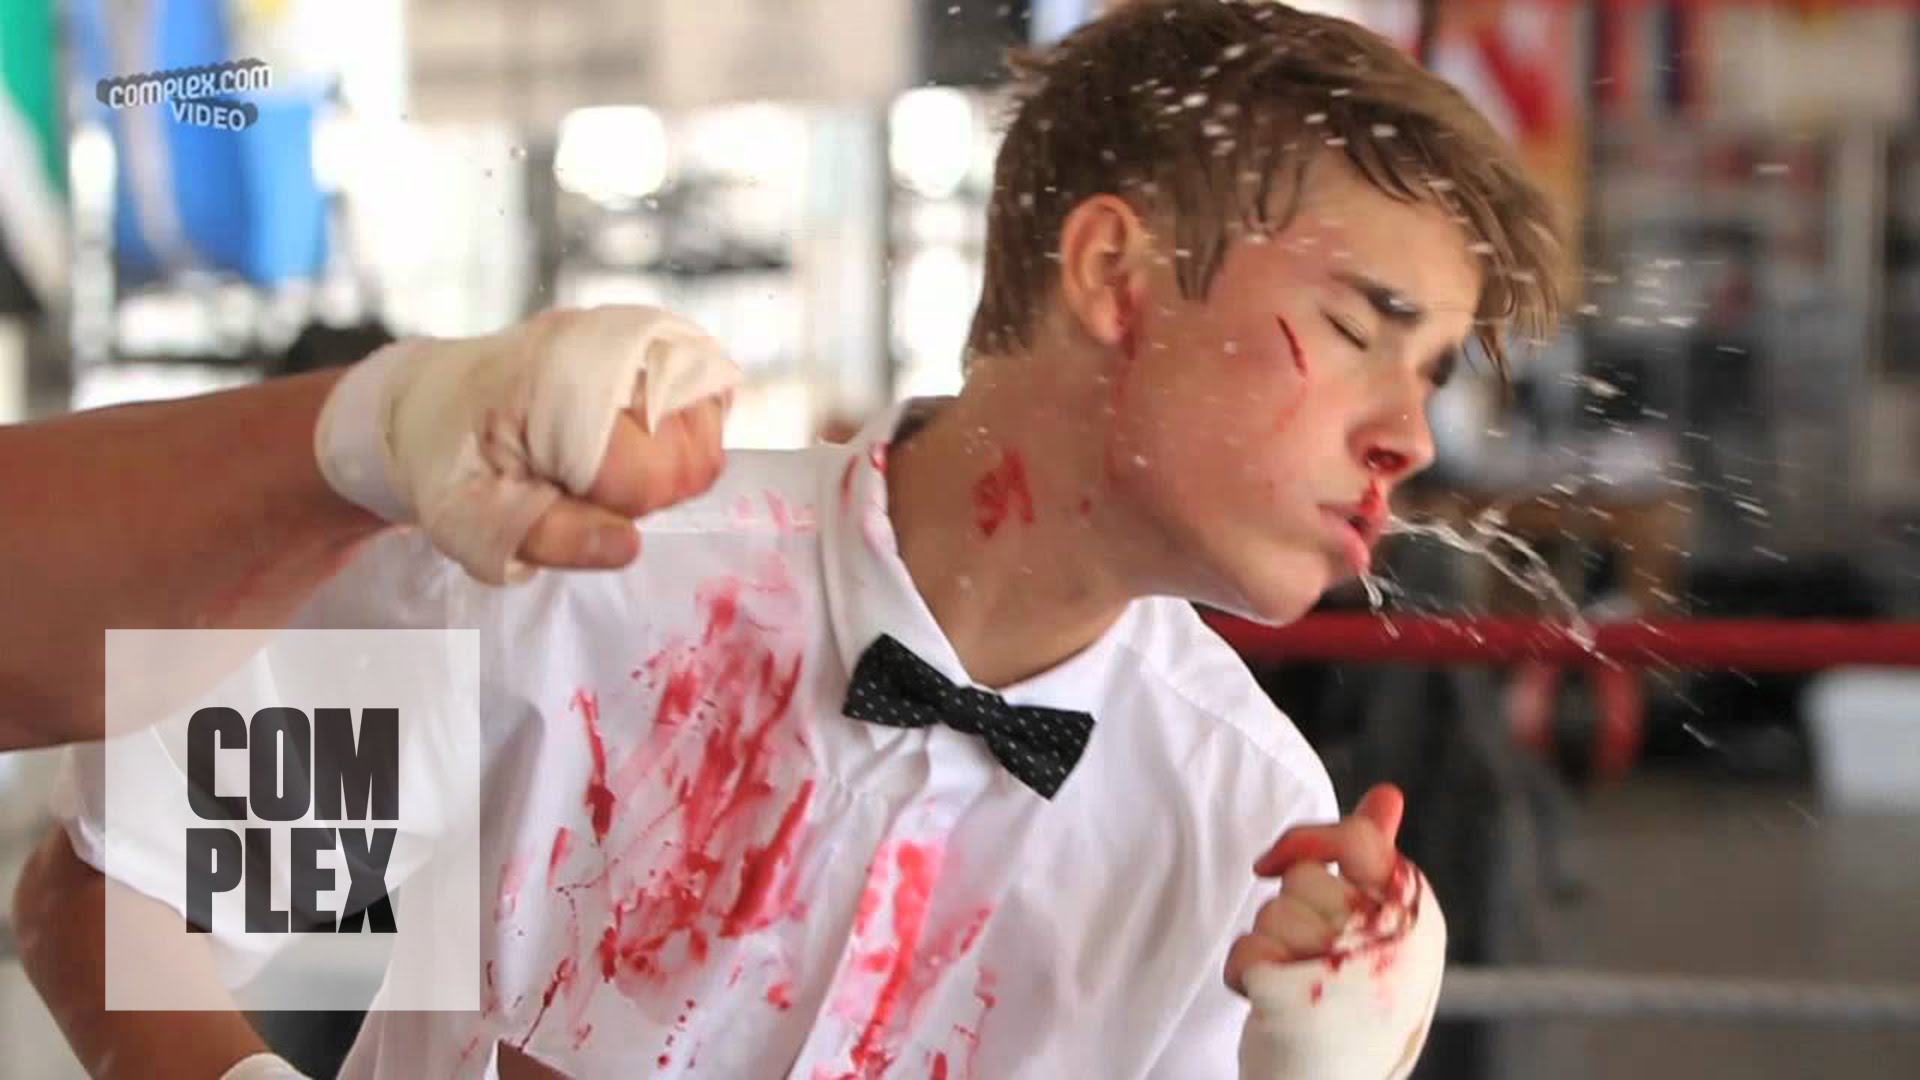 Justin Bieber Fights Back in The Boxing Ring MMA Video1920 x 1080